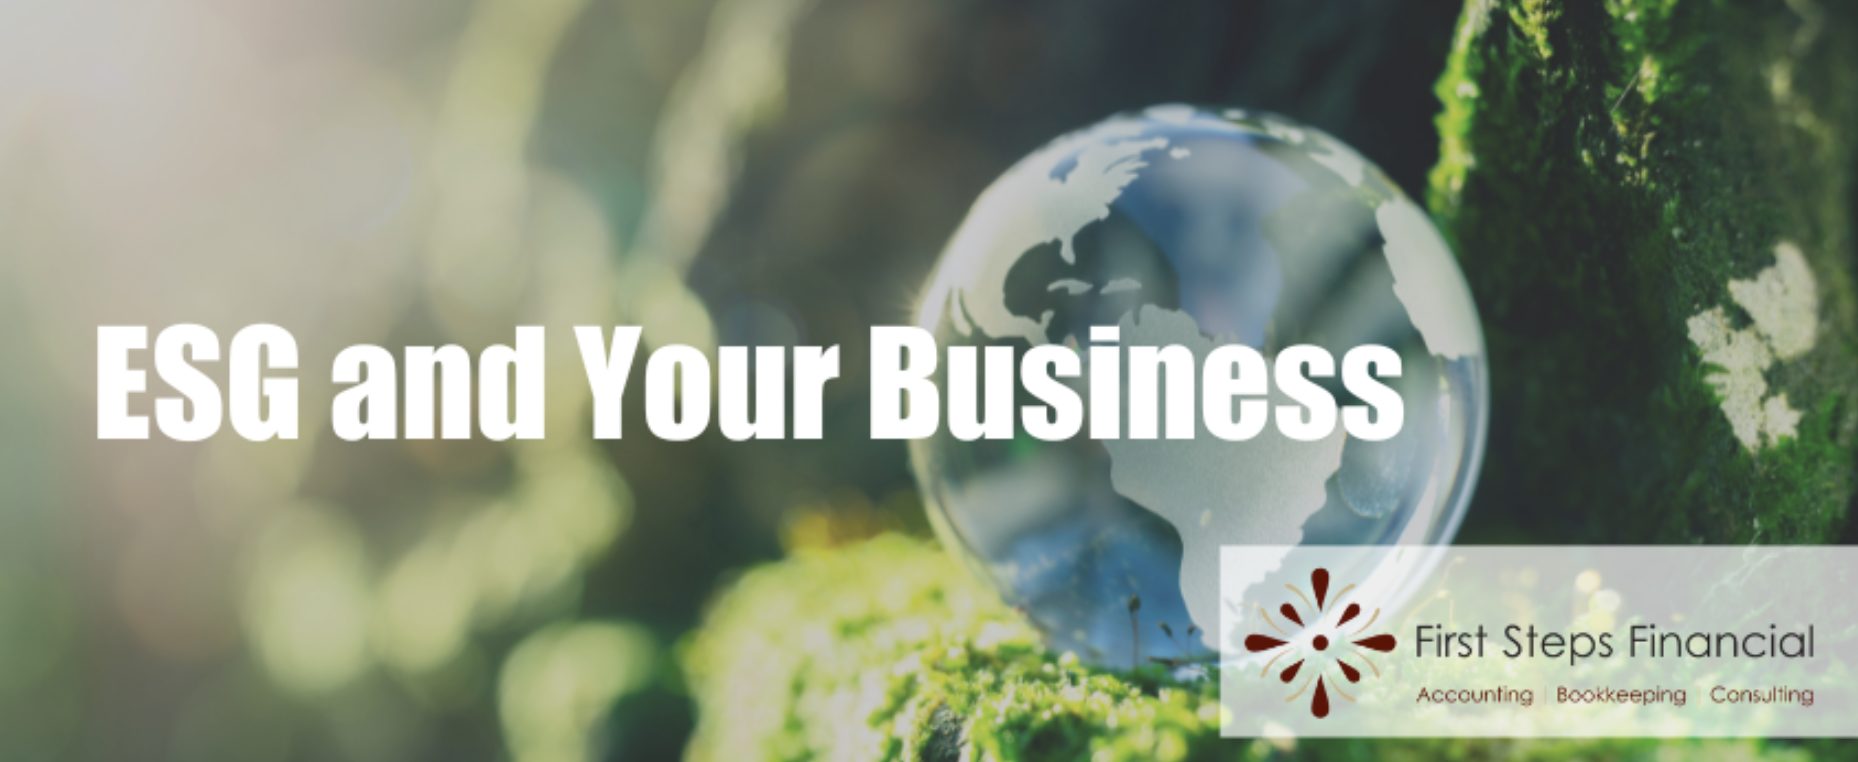 ESG and Your Business